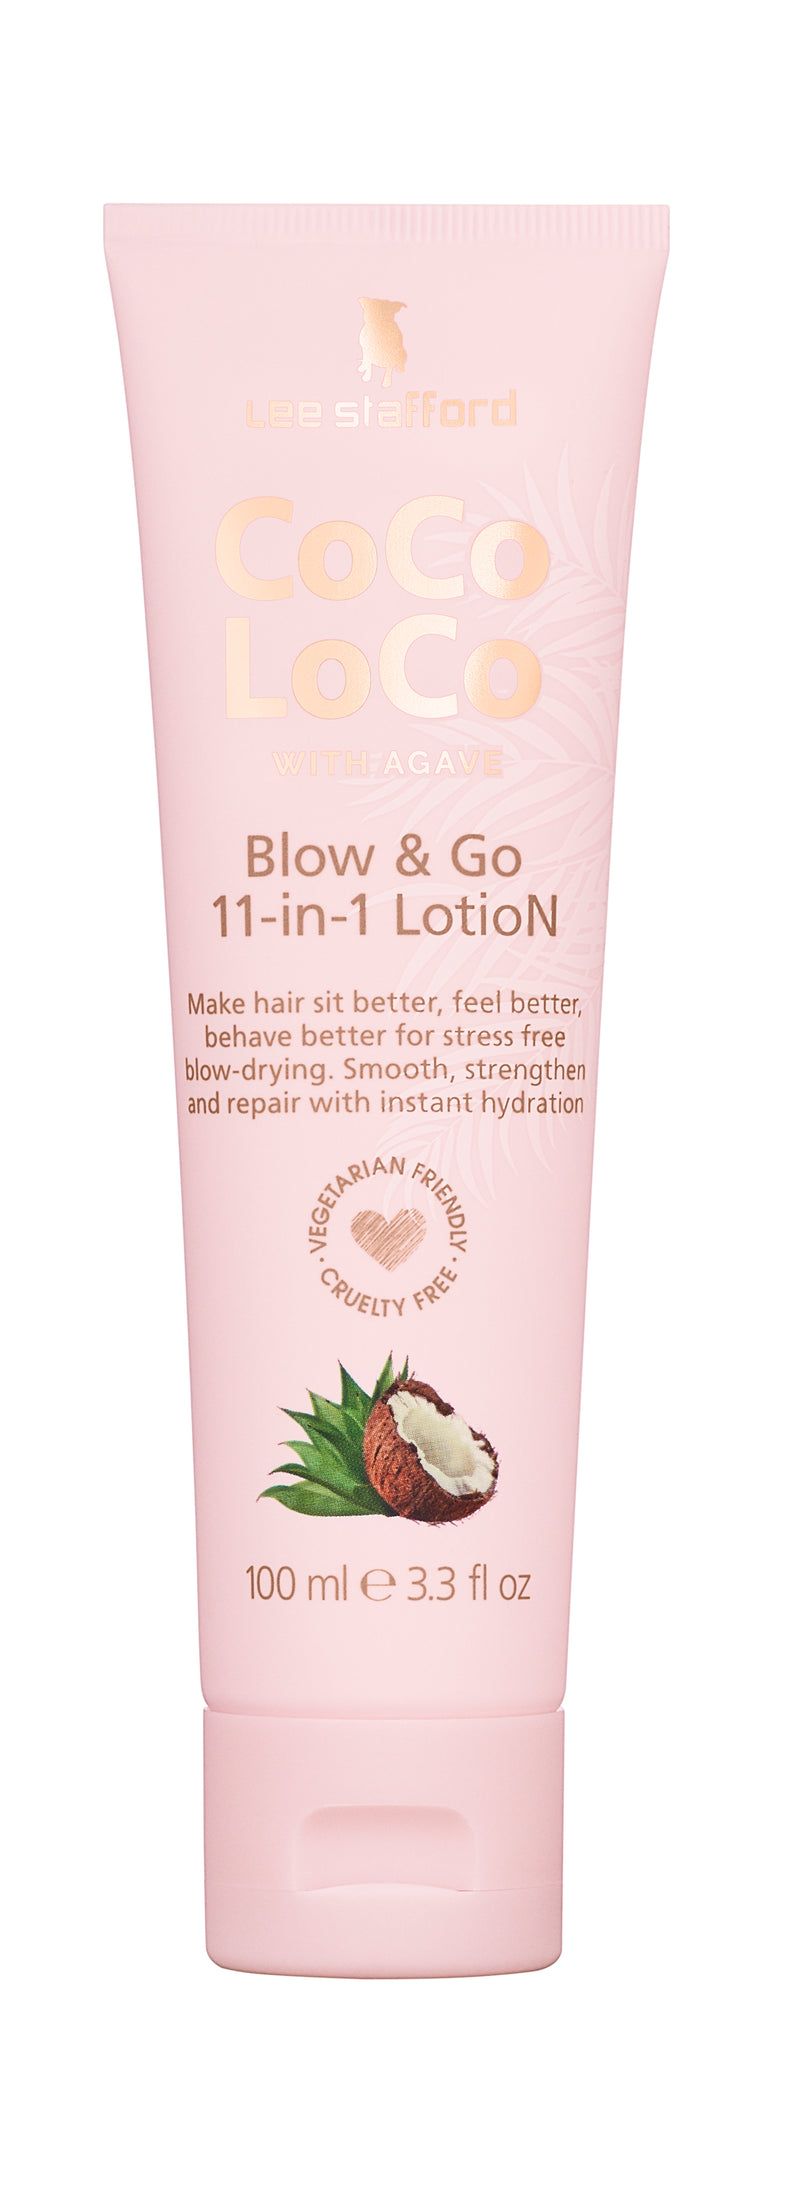 Lee Stafford Coco Loco with Agave Blow & Go Lotion 100ml